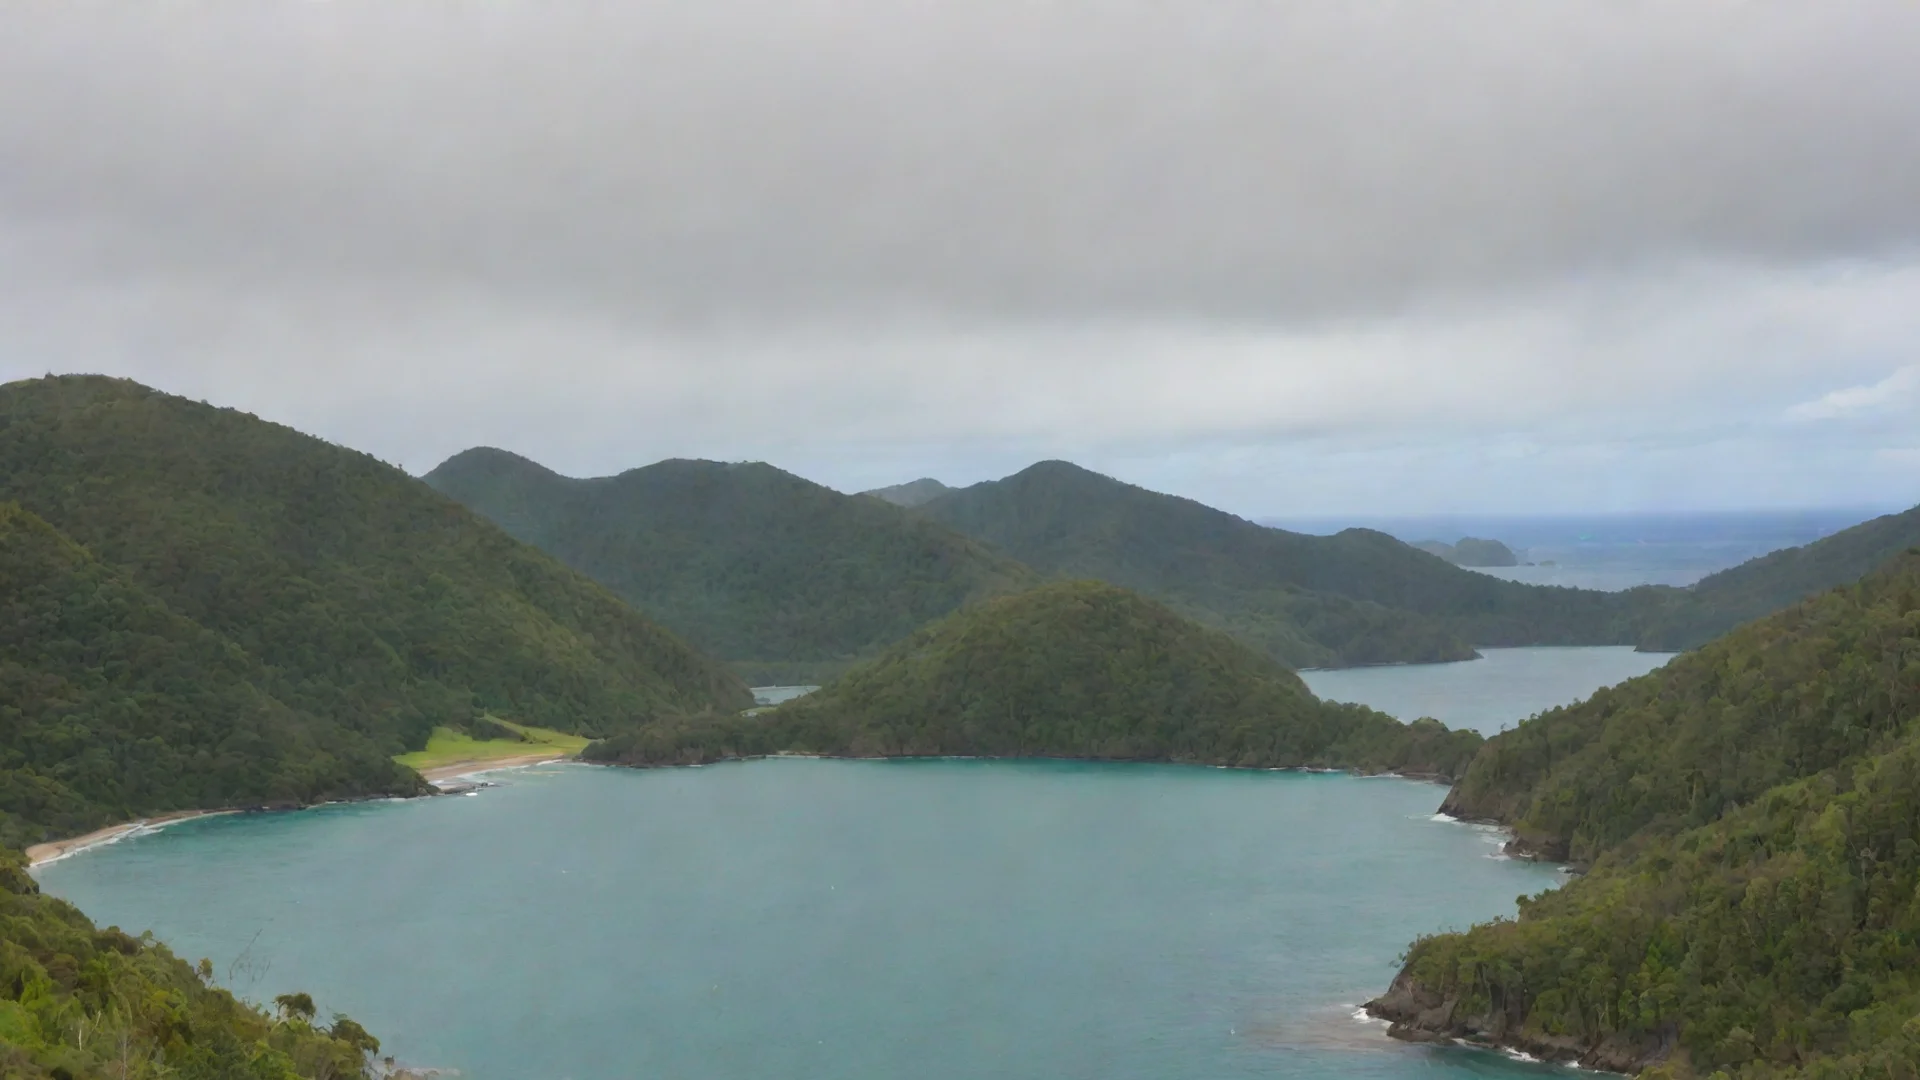 forests rolling hills on shore pitureque bay of islands wide